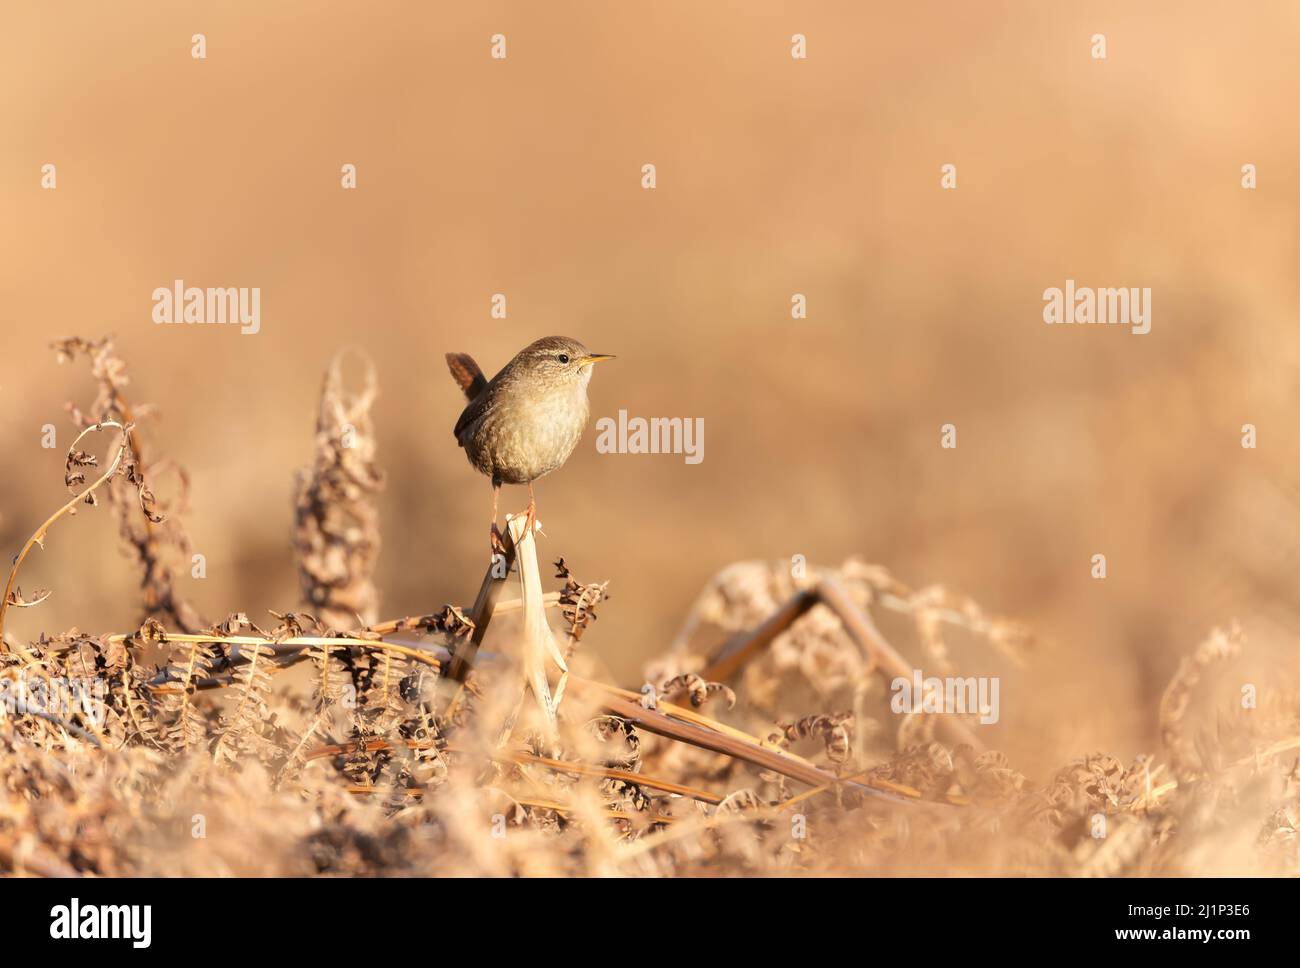 Close up of a wren perched on a fern branch in autumn, UK. Stock Photo